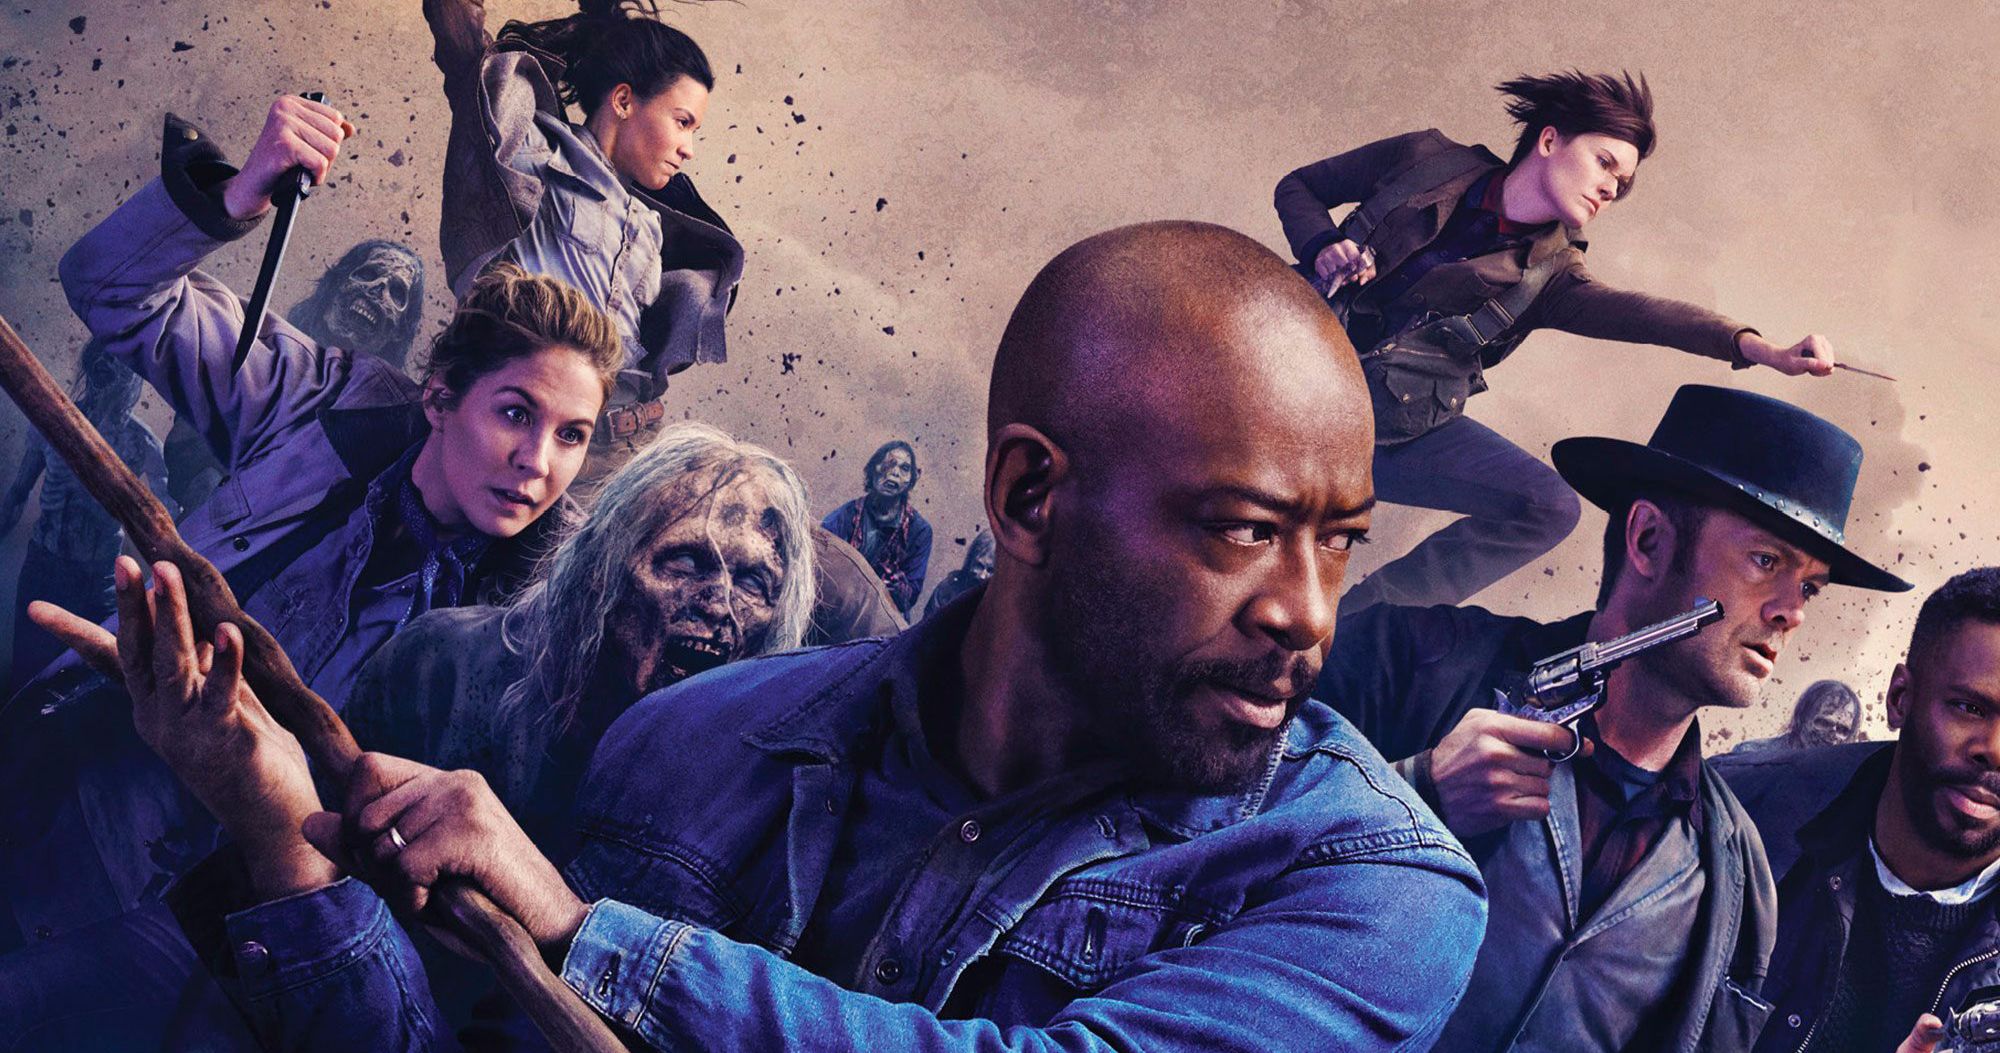 Fear the Walking Dead Season 6 Probably Won't Resume Shooting Any Time Soon Says Lennie James